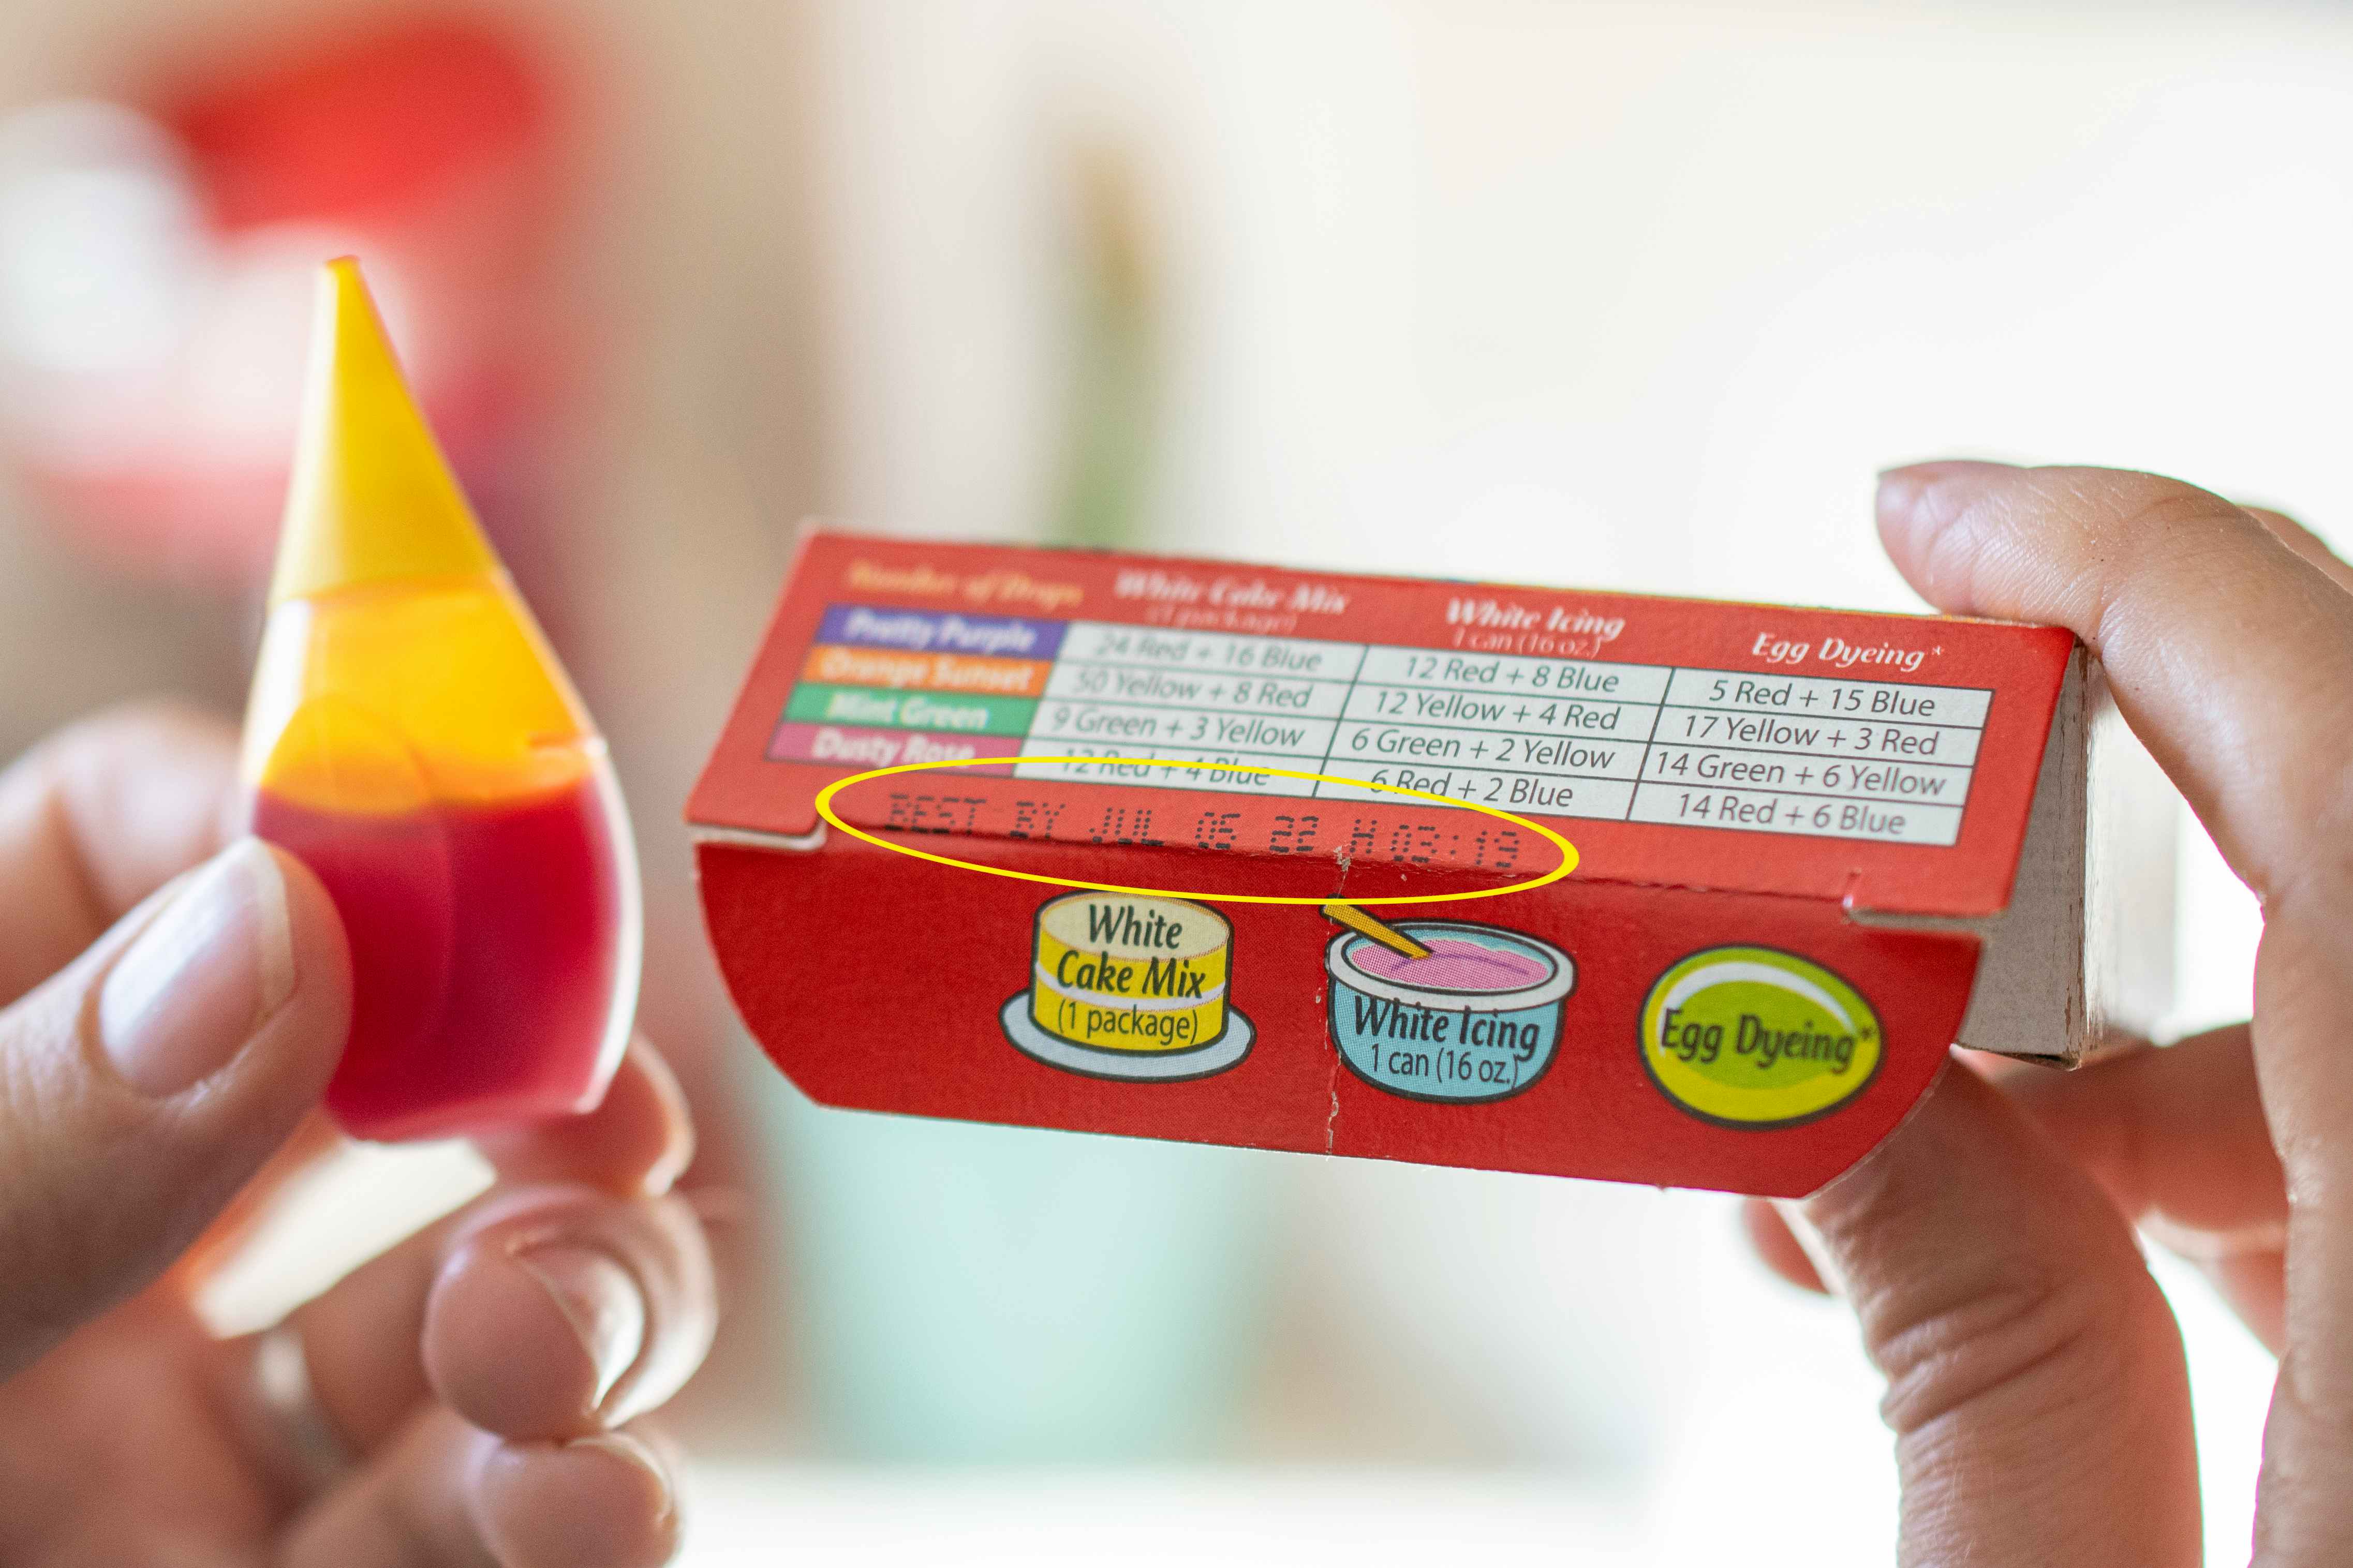 A food coloring box next to a bottle of yellow food coloring. A yellow circle is around the expiration date.